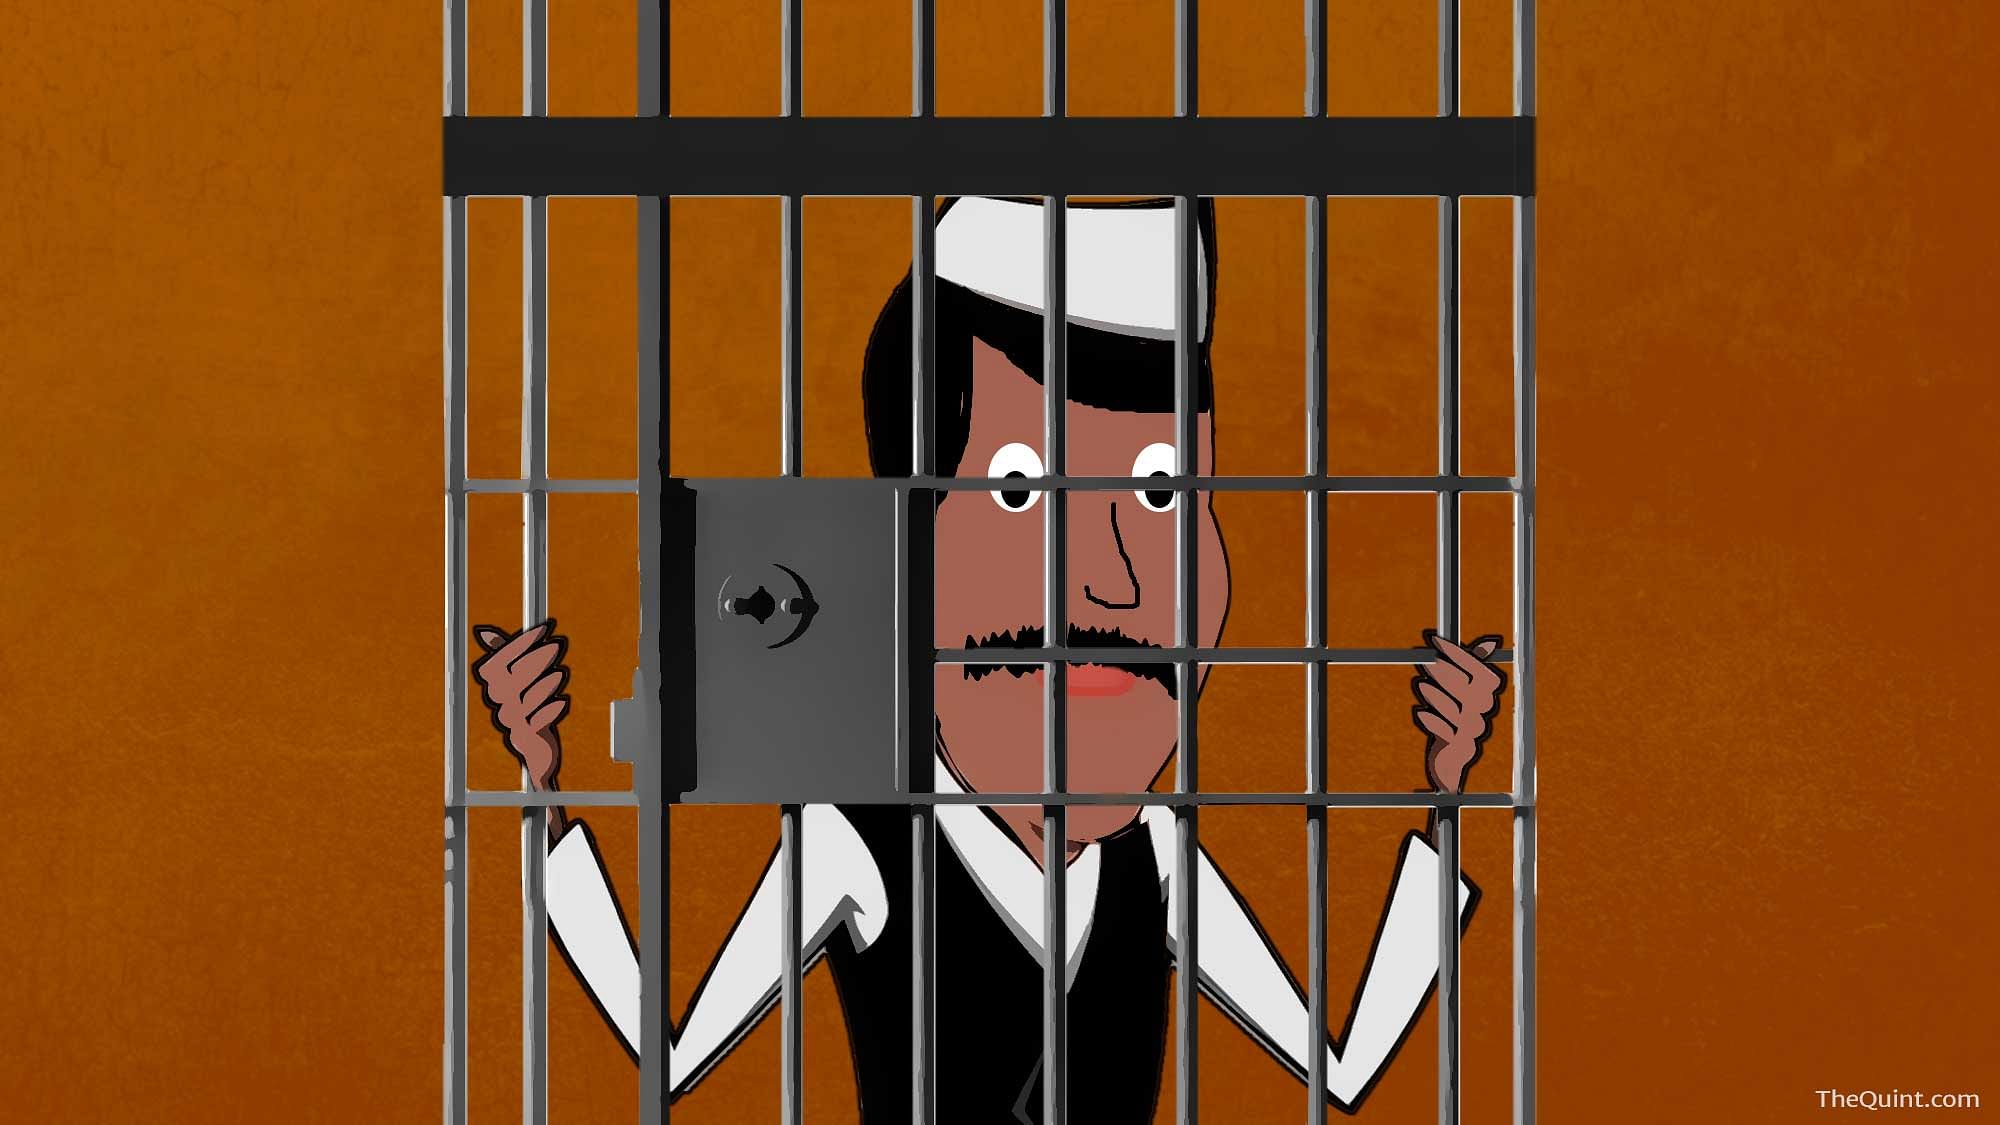 6 Netas Who are Behind Bars For Scamming the Aam Aadmi